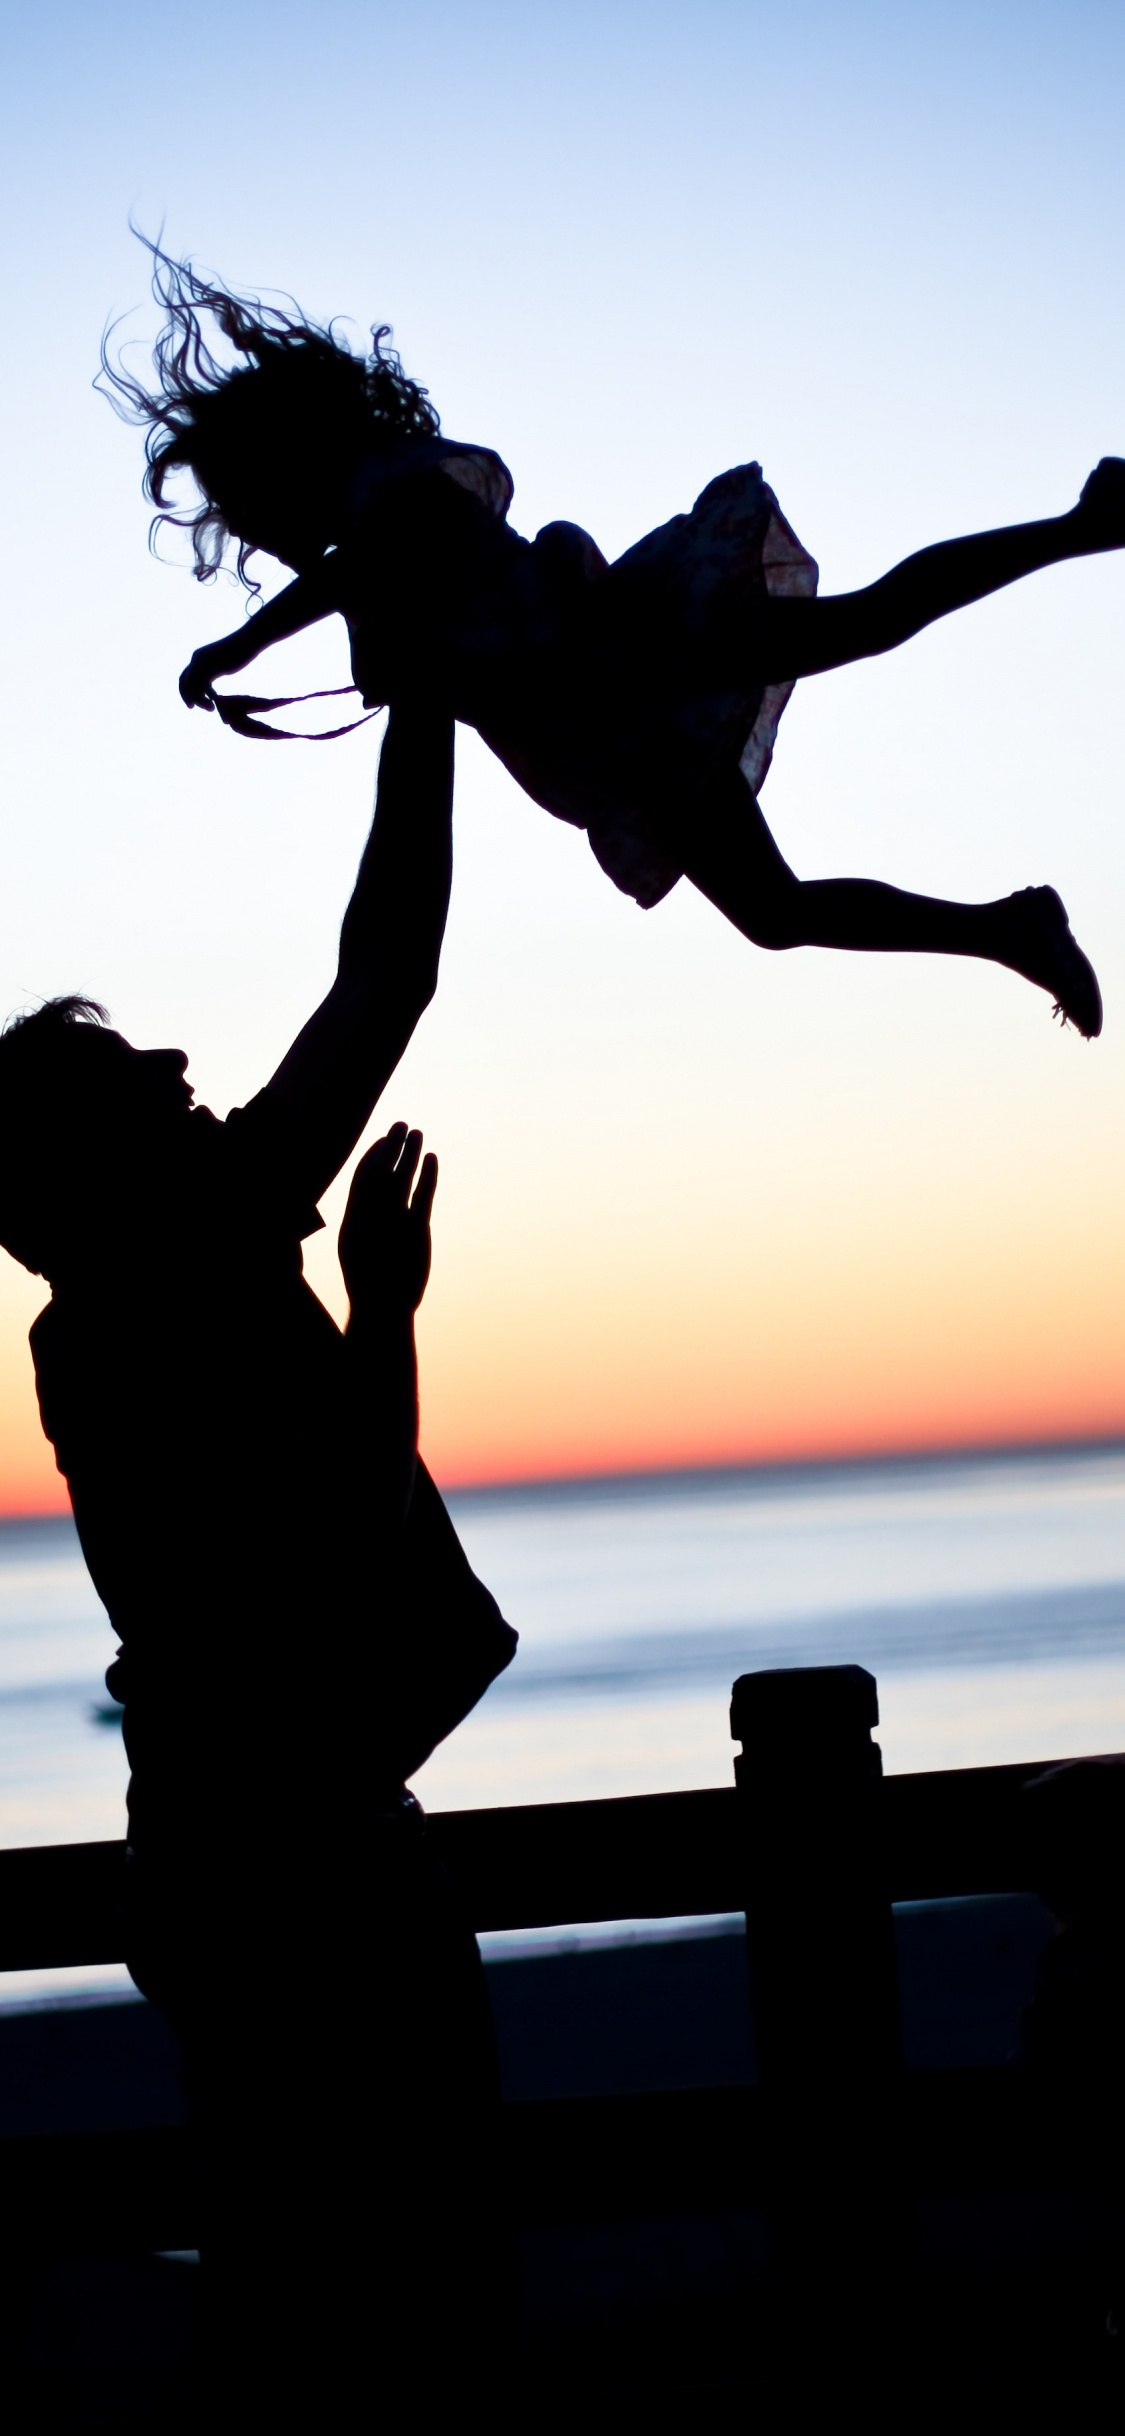 Father, Daughter, Family, People in Nature, Jumping. Wallpaper in 1125x2436 Resolution